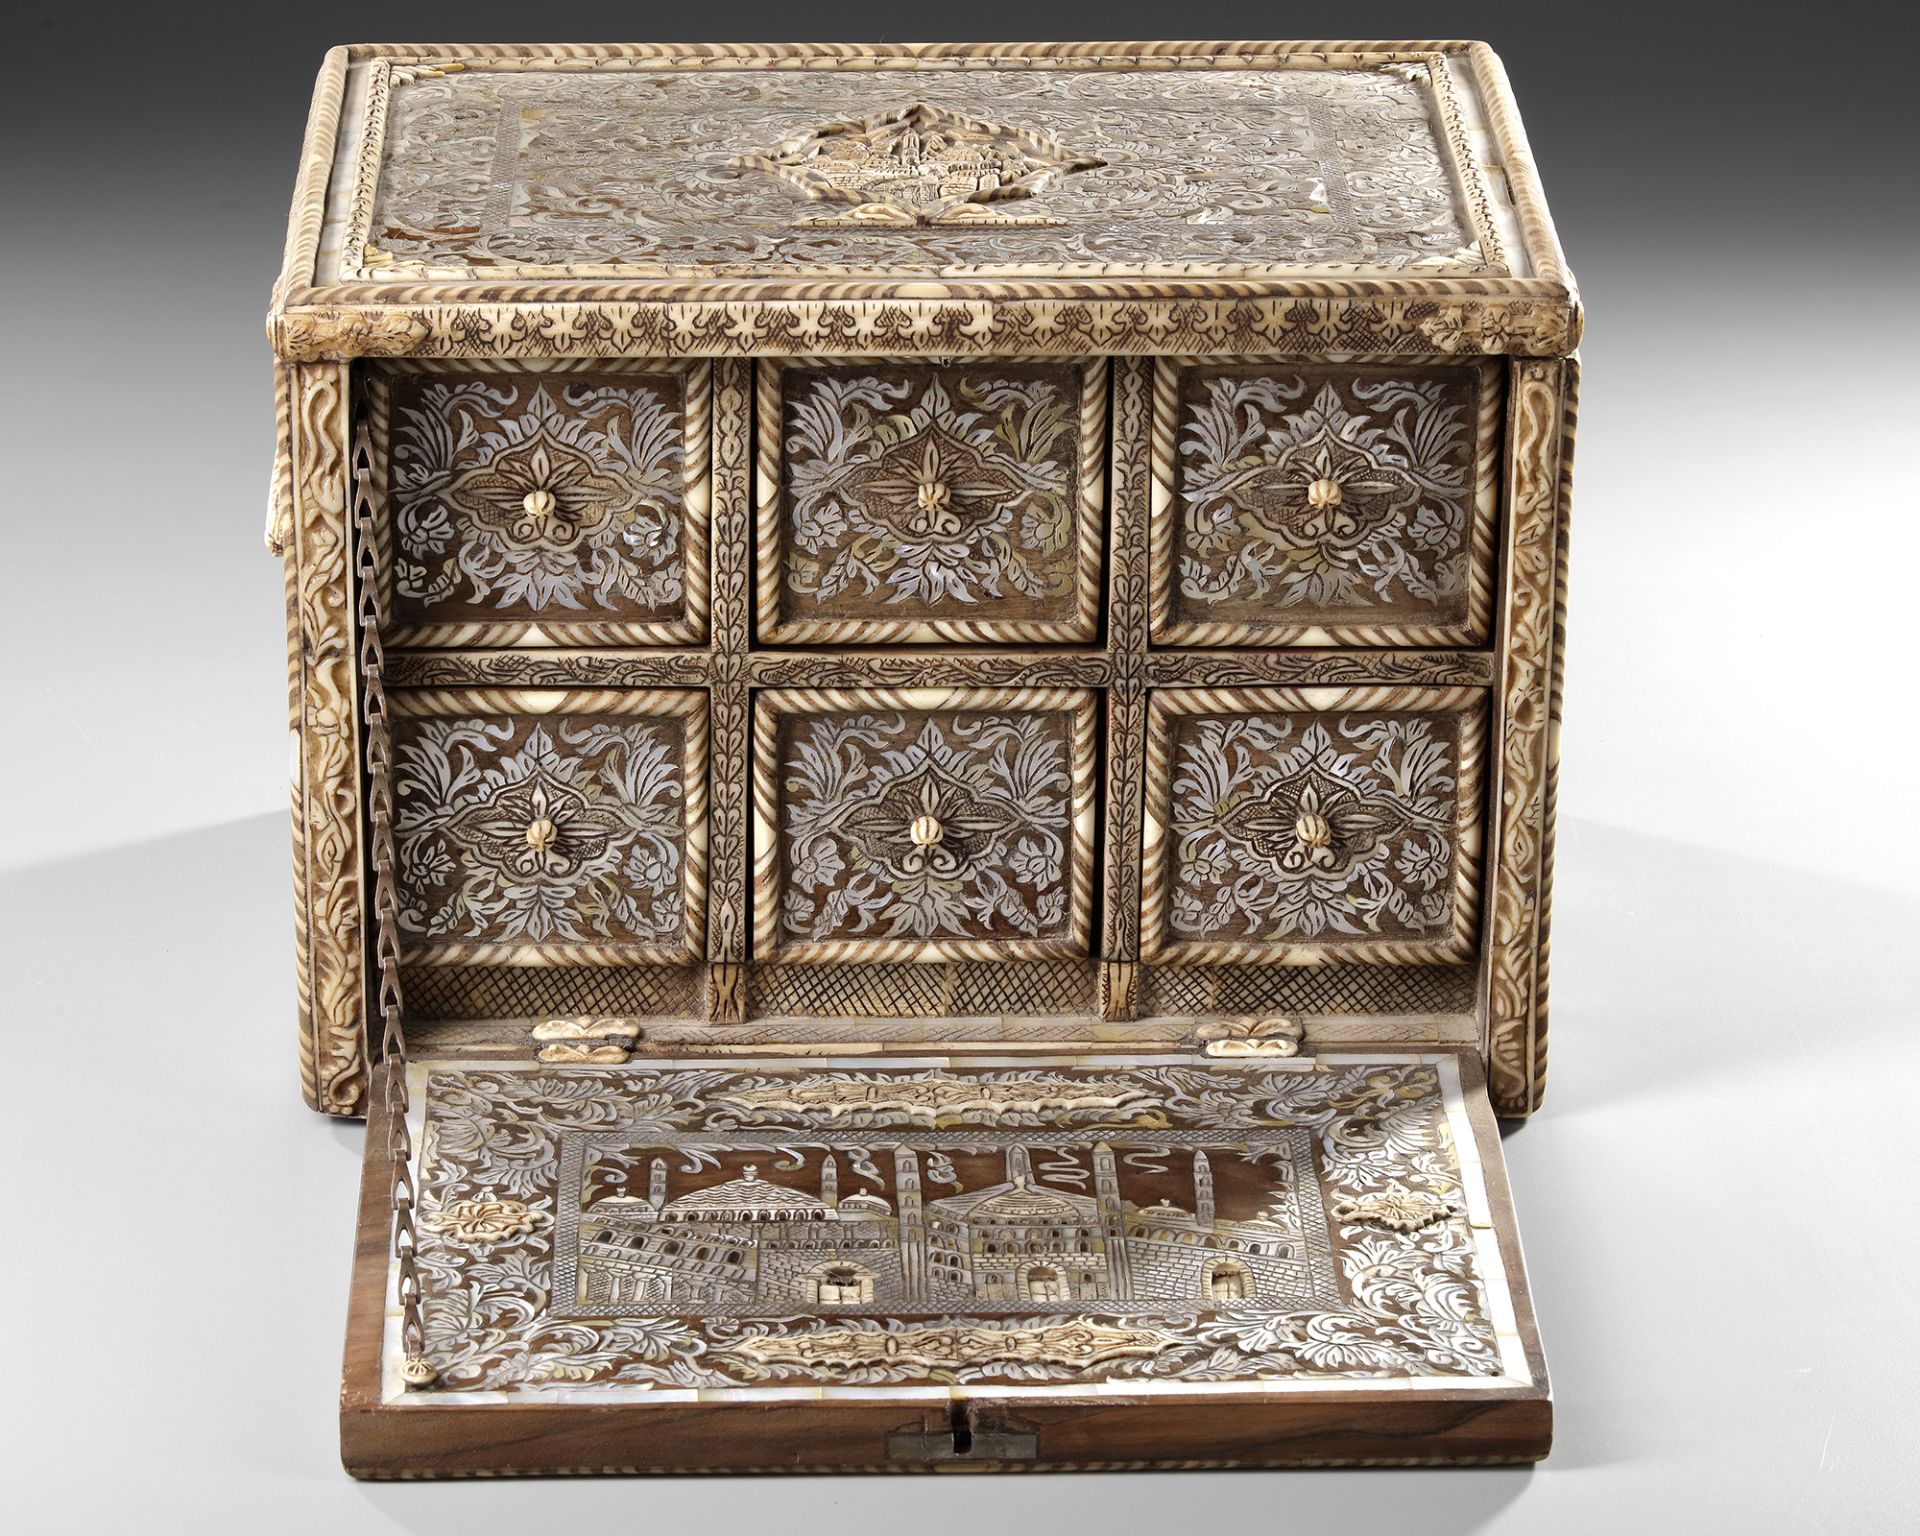 AN OTTOMAN MOTHER-OF-PEARL AND BONE INLAID CABINET, TURKEY OR SYRIA, 18TH-19TH CENTURY - Image 3 of 6